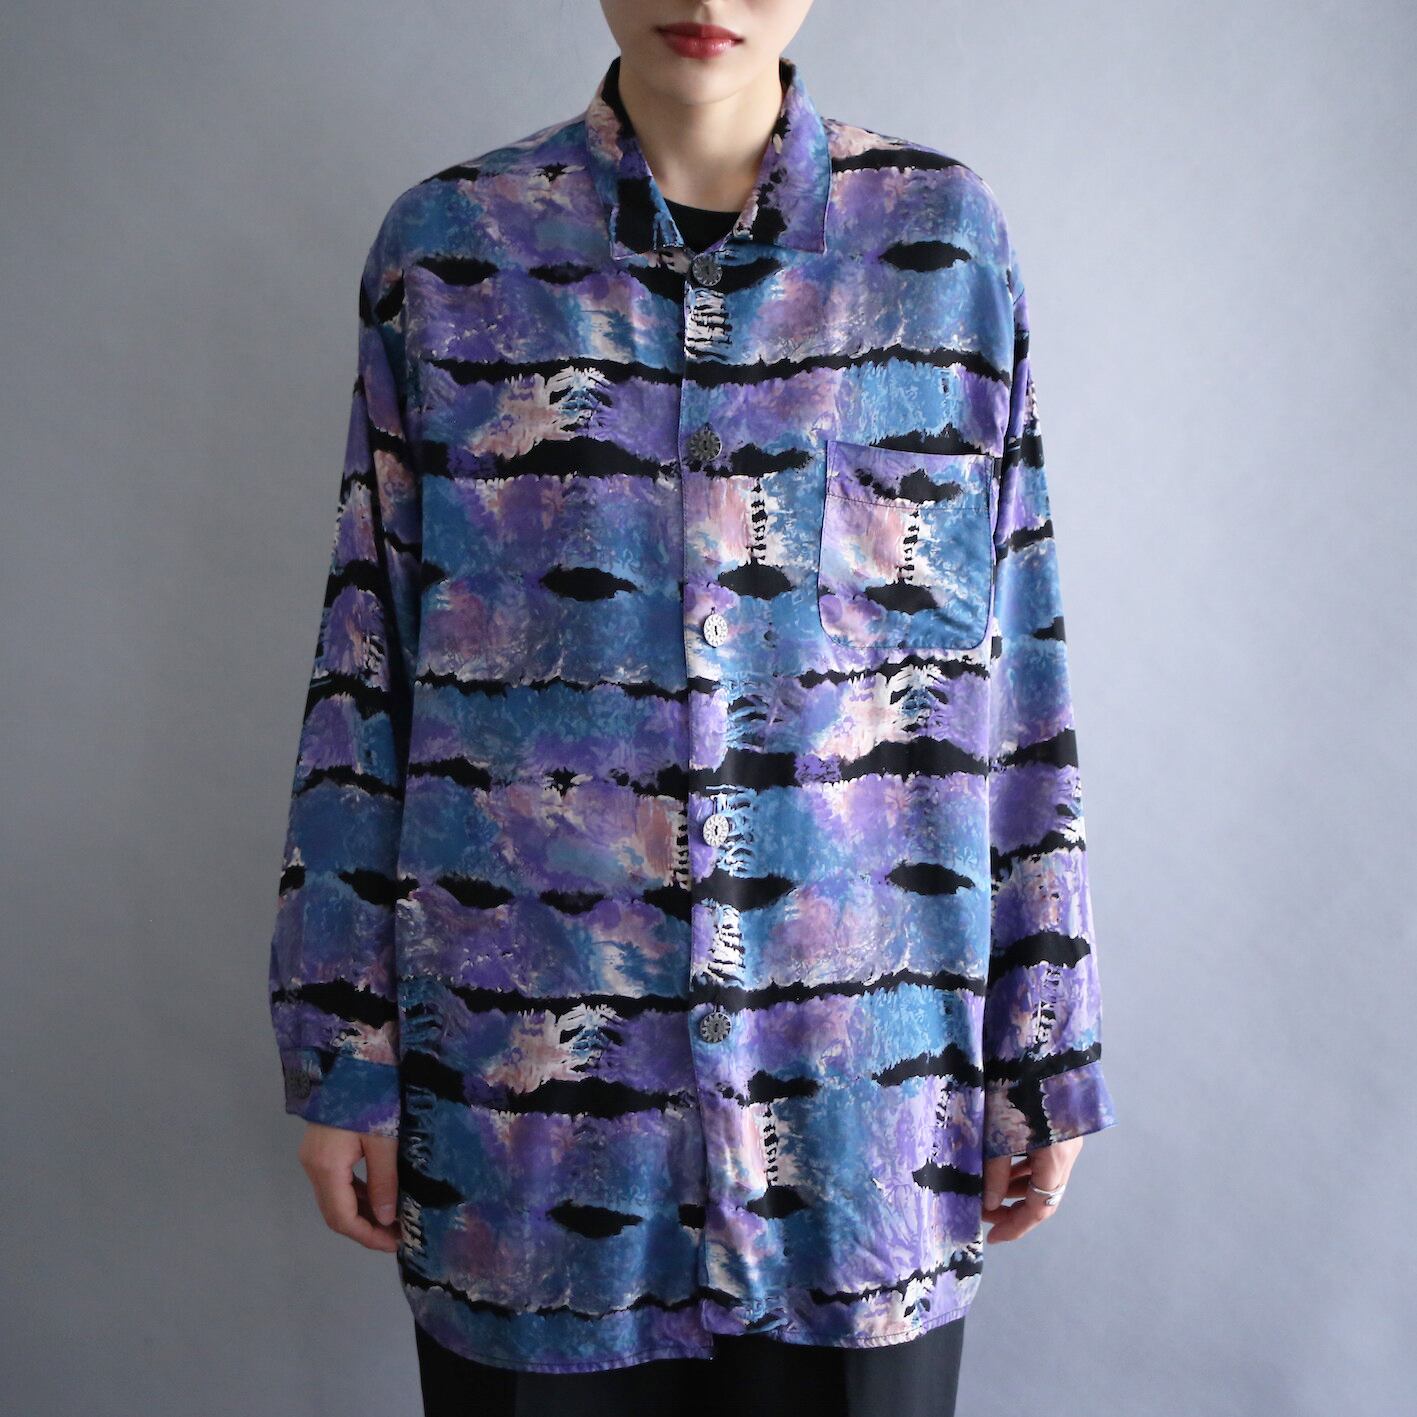 mysterious good coloring art pattern silver big button shirt